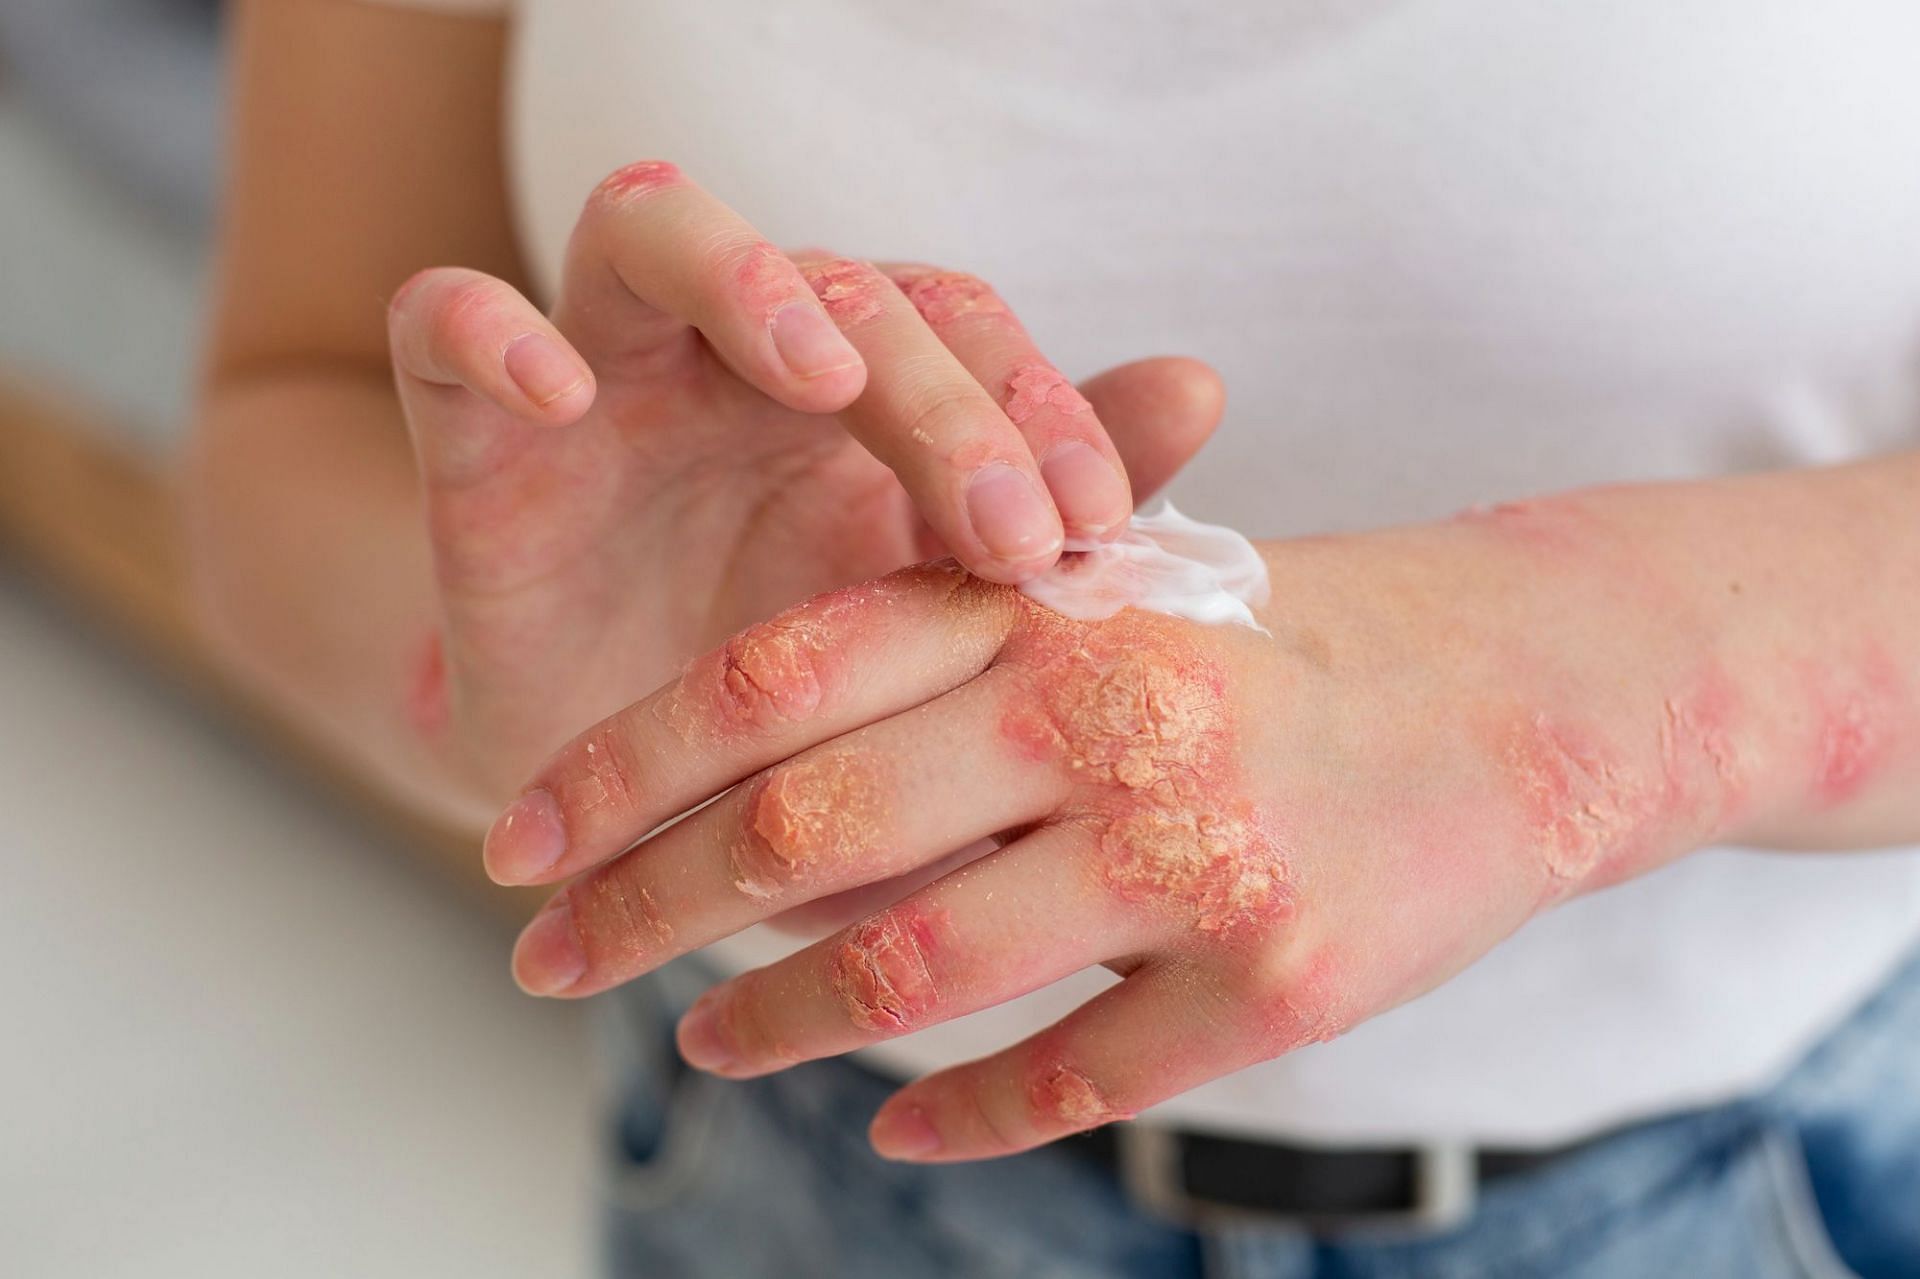 Several types of fungal infections can occur on the skin. (Image via Freepik)